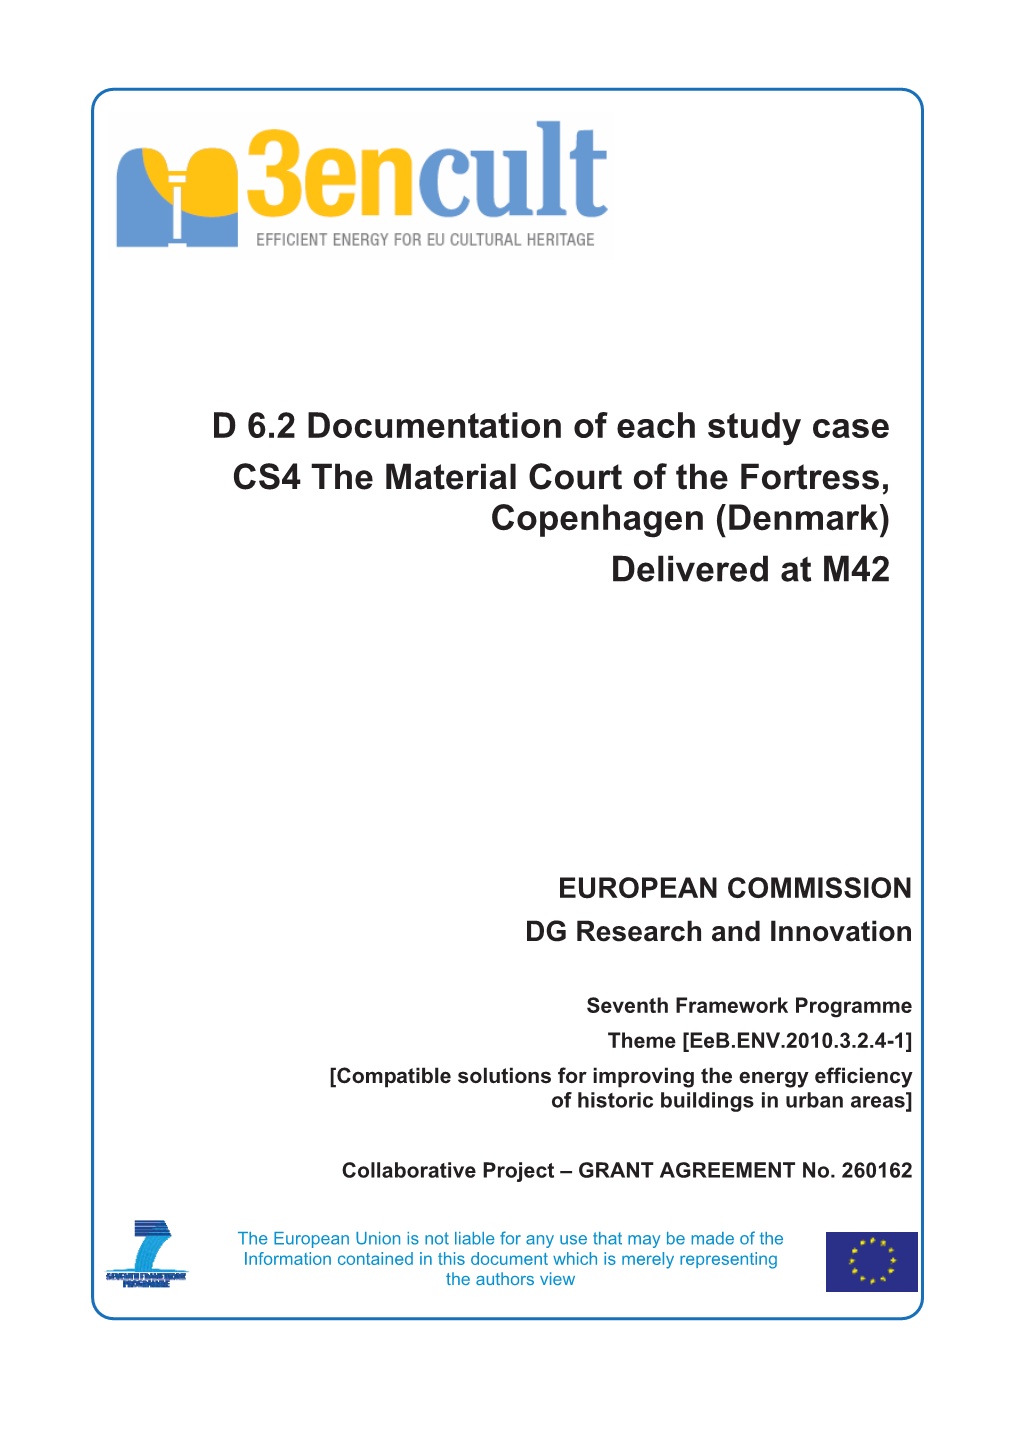 D 6.2 Documentation of Each Study Case CS4 the Material Court of the Fortress, Copenhagen (Denmark) Delivered at M42